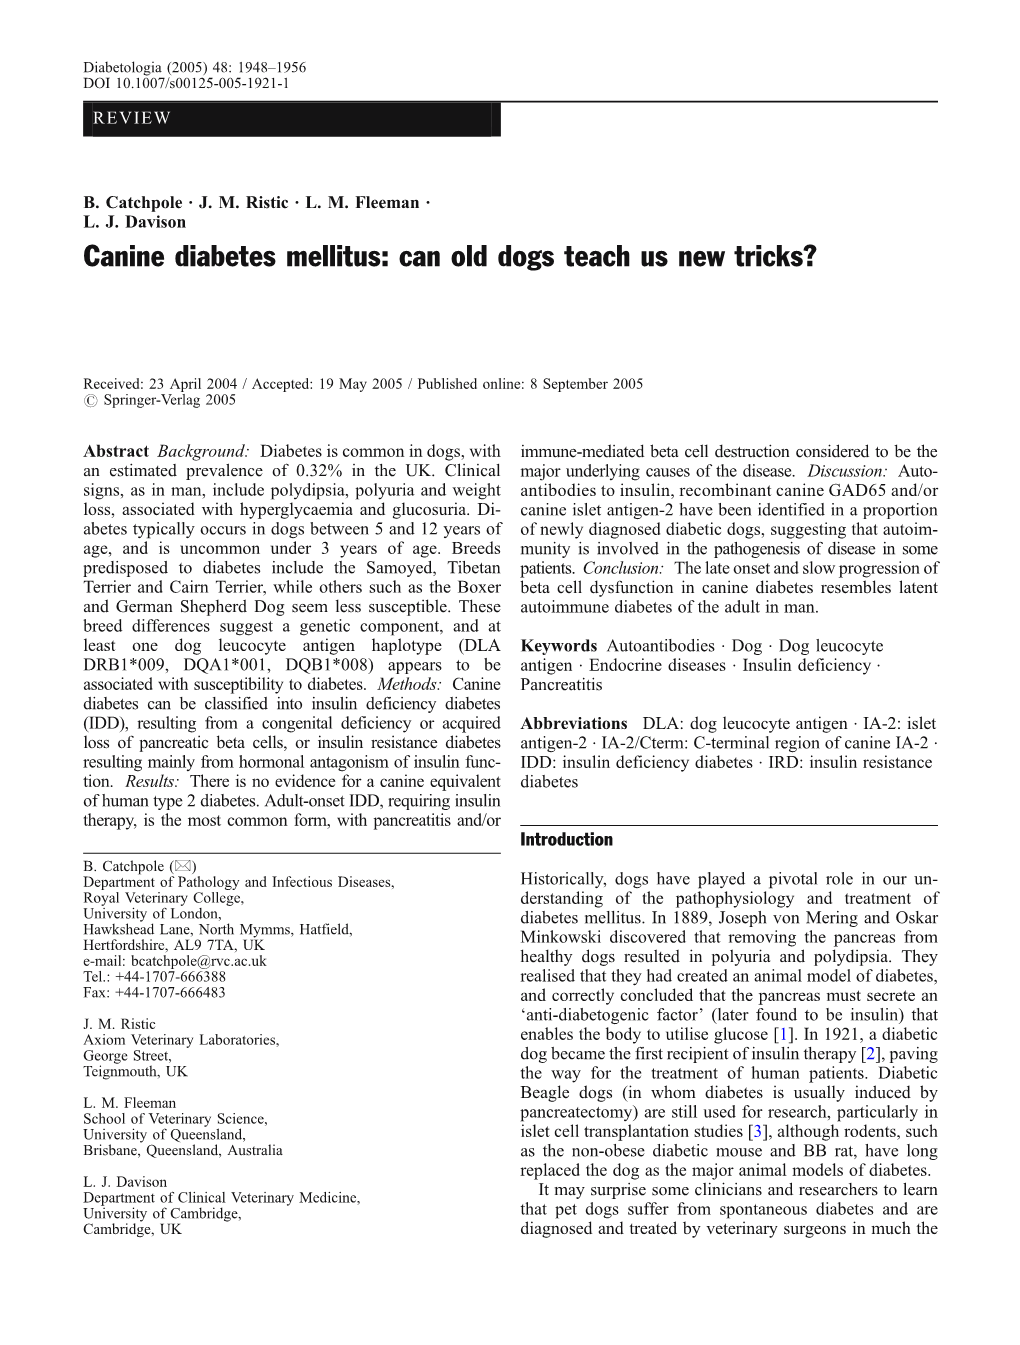 Canine Diabetes Mellitus: Can Old Dogs Teach Us New Tricks?